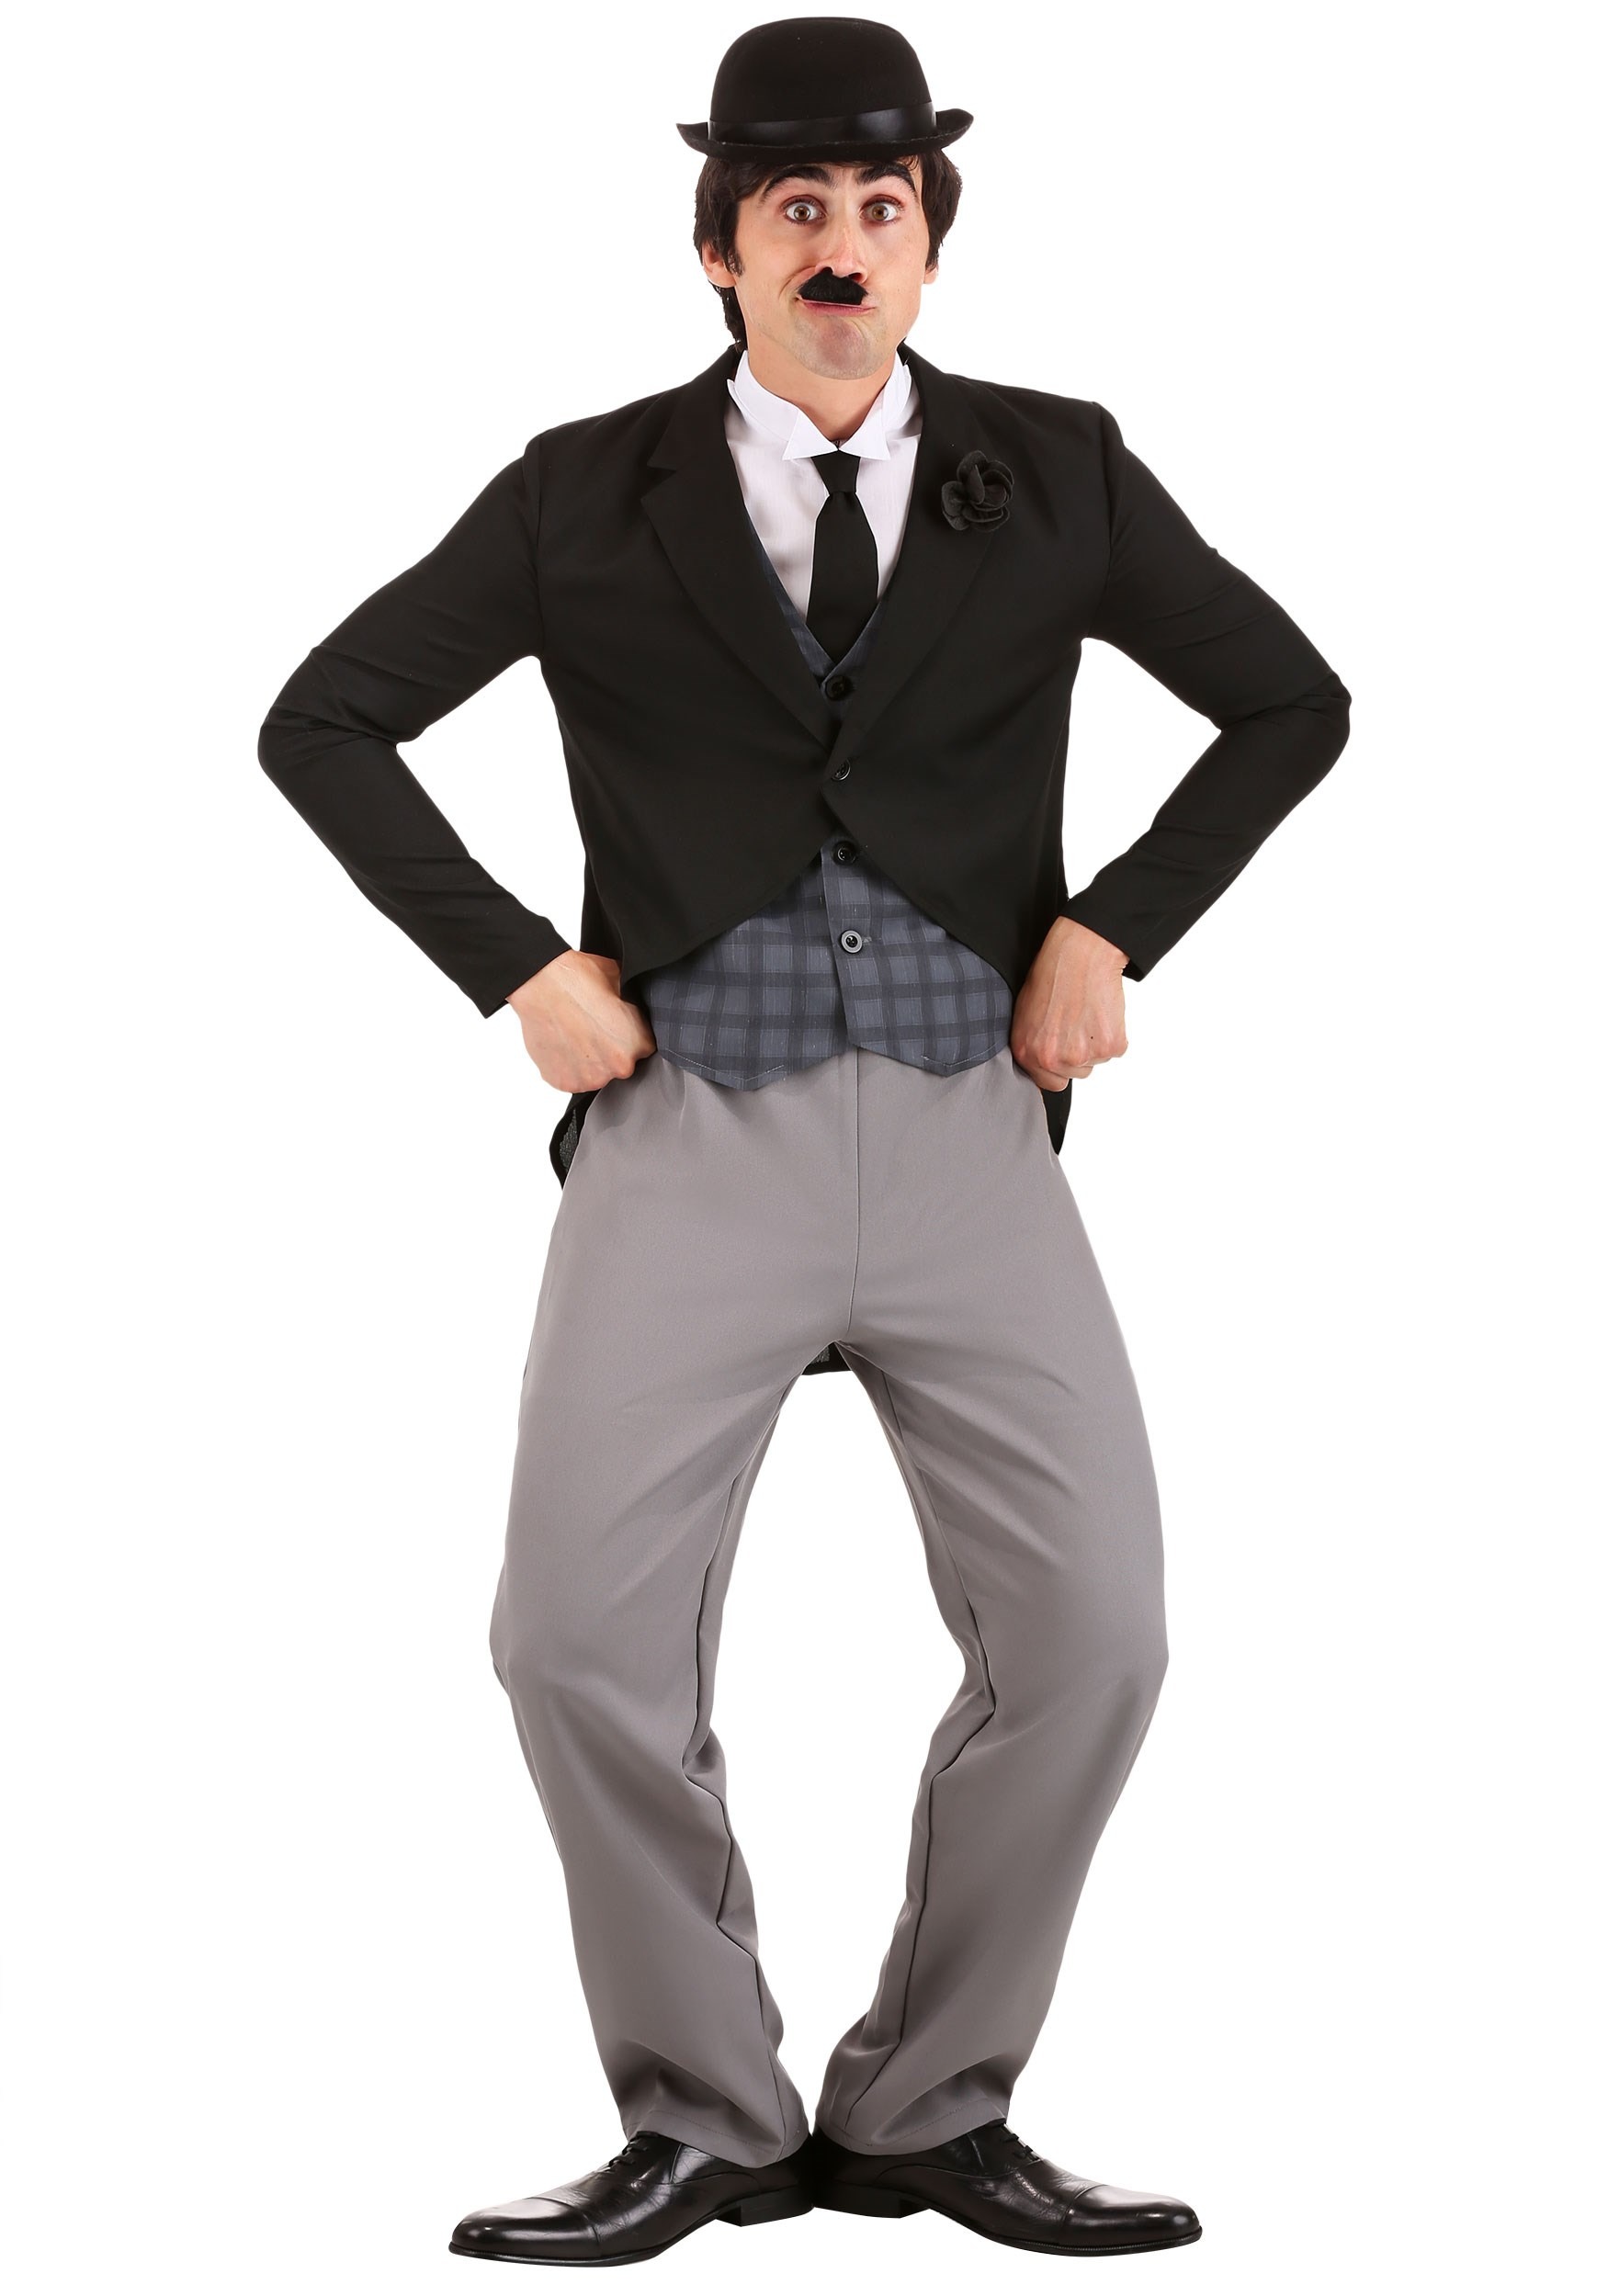 Adult Vintage 1920s Movie Star Costume, Charlie Chaplin comedian costume complete with a cane